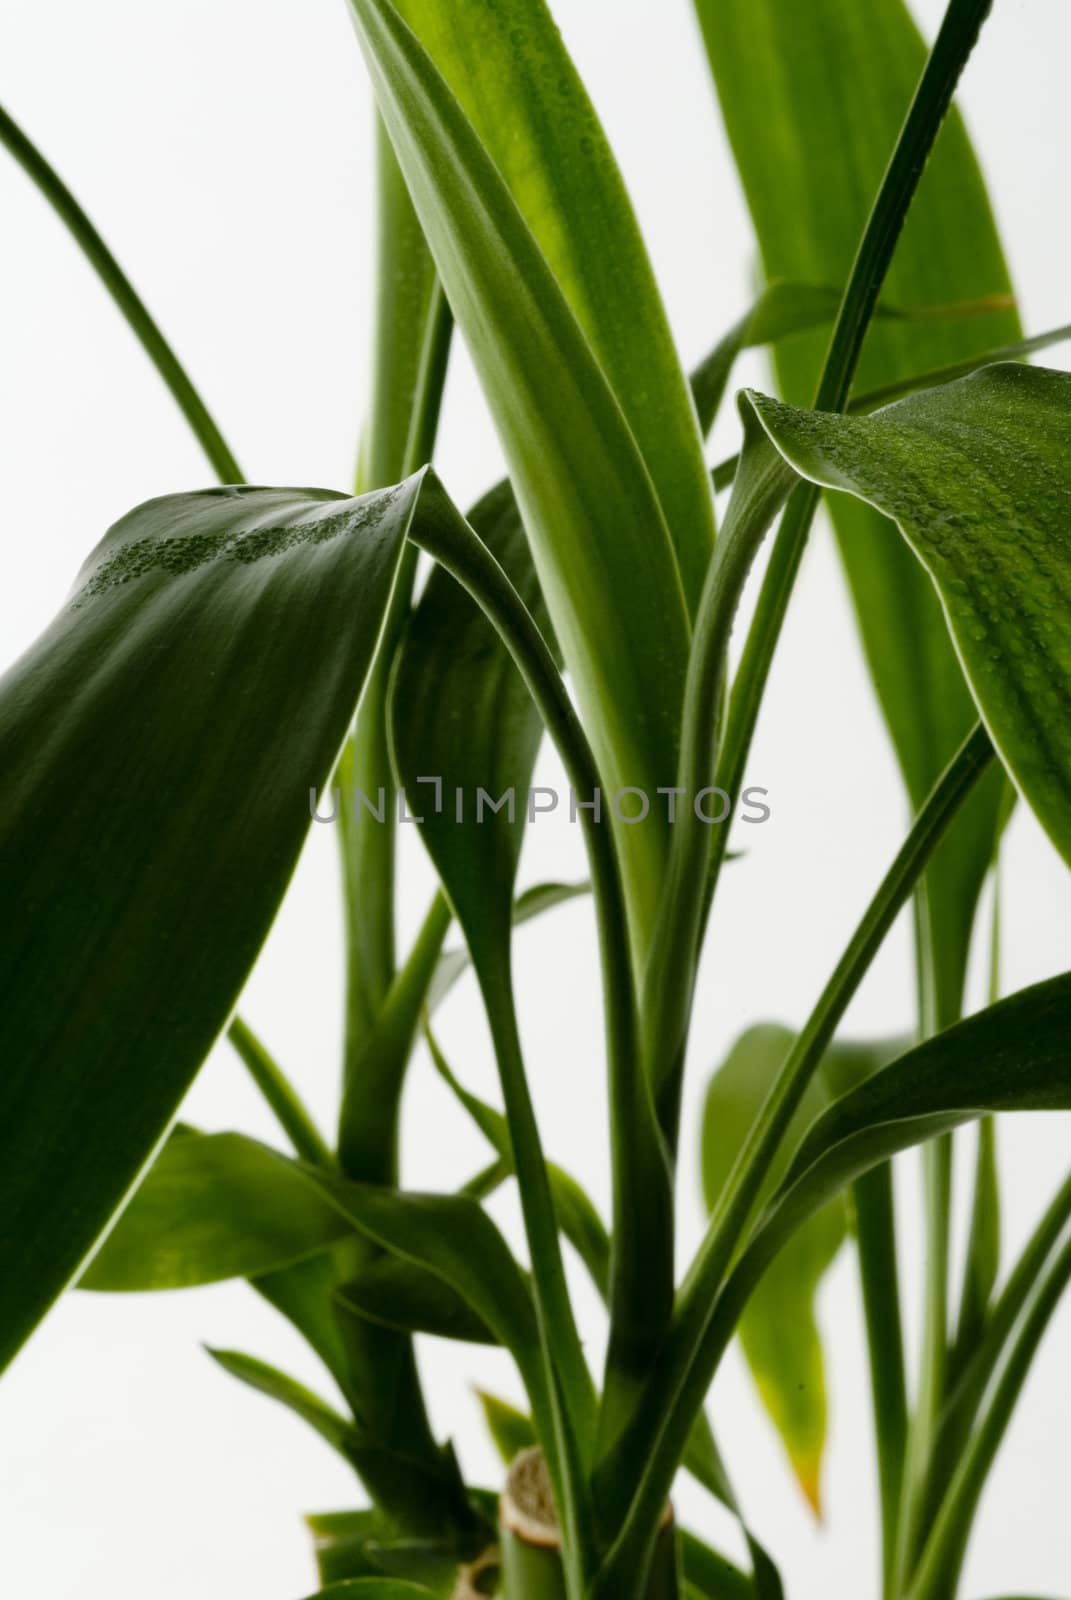 Green Leaves isolated on a white background.